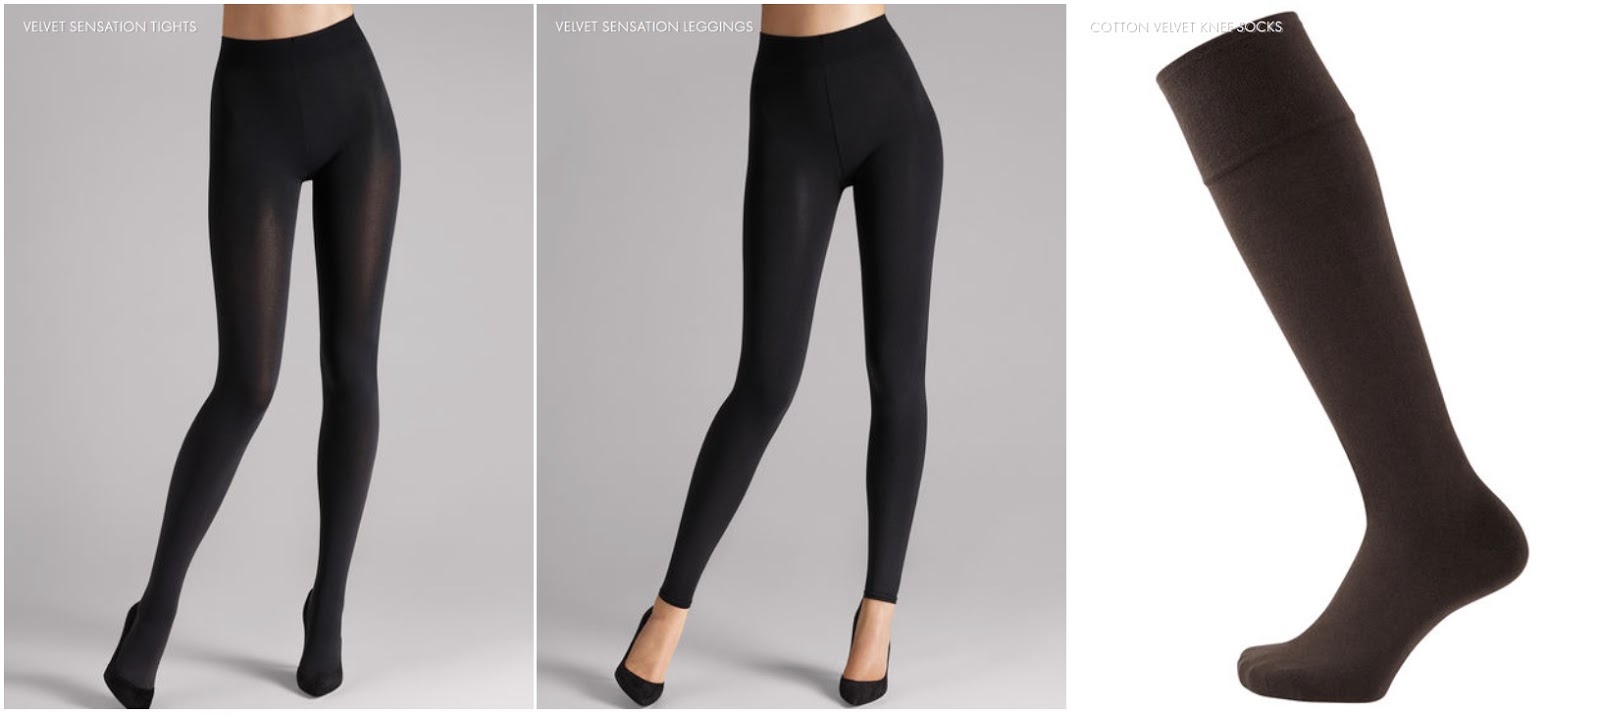 Hosiery For Men: Wolford add tights to men's category in online shop